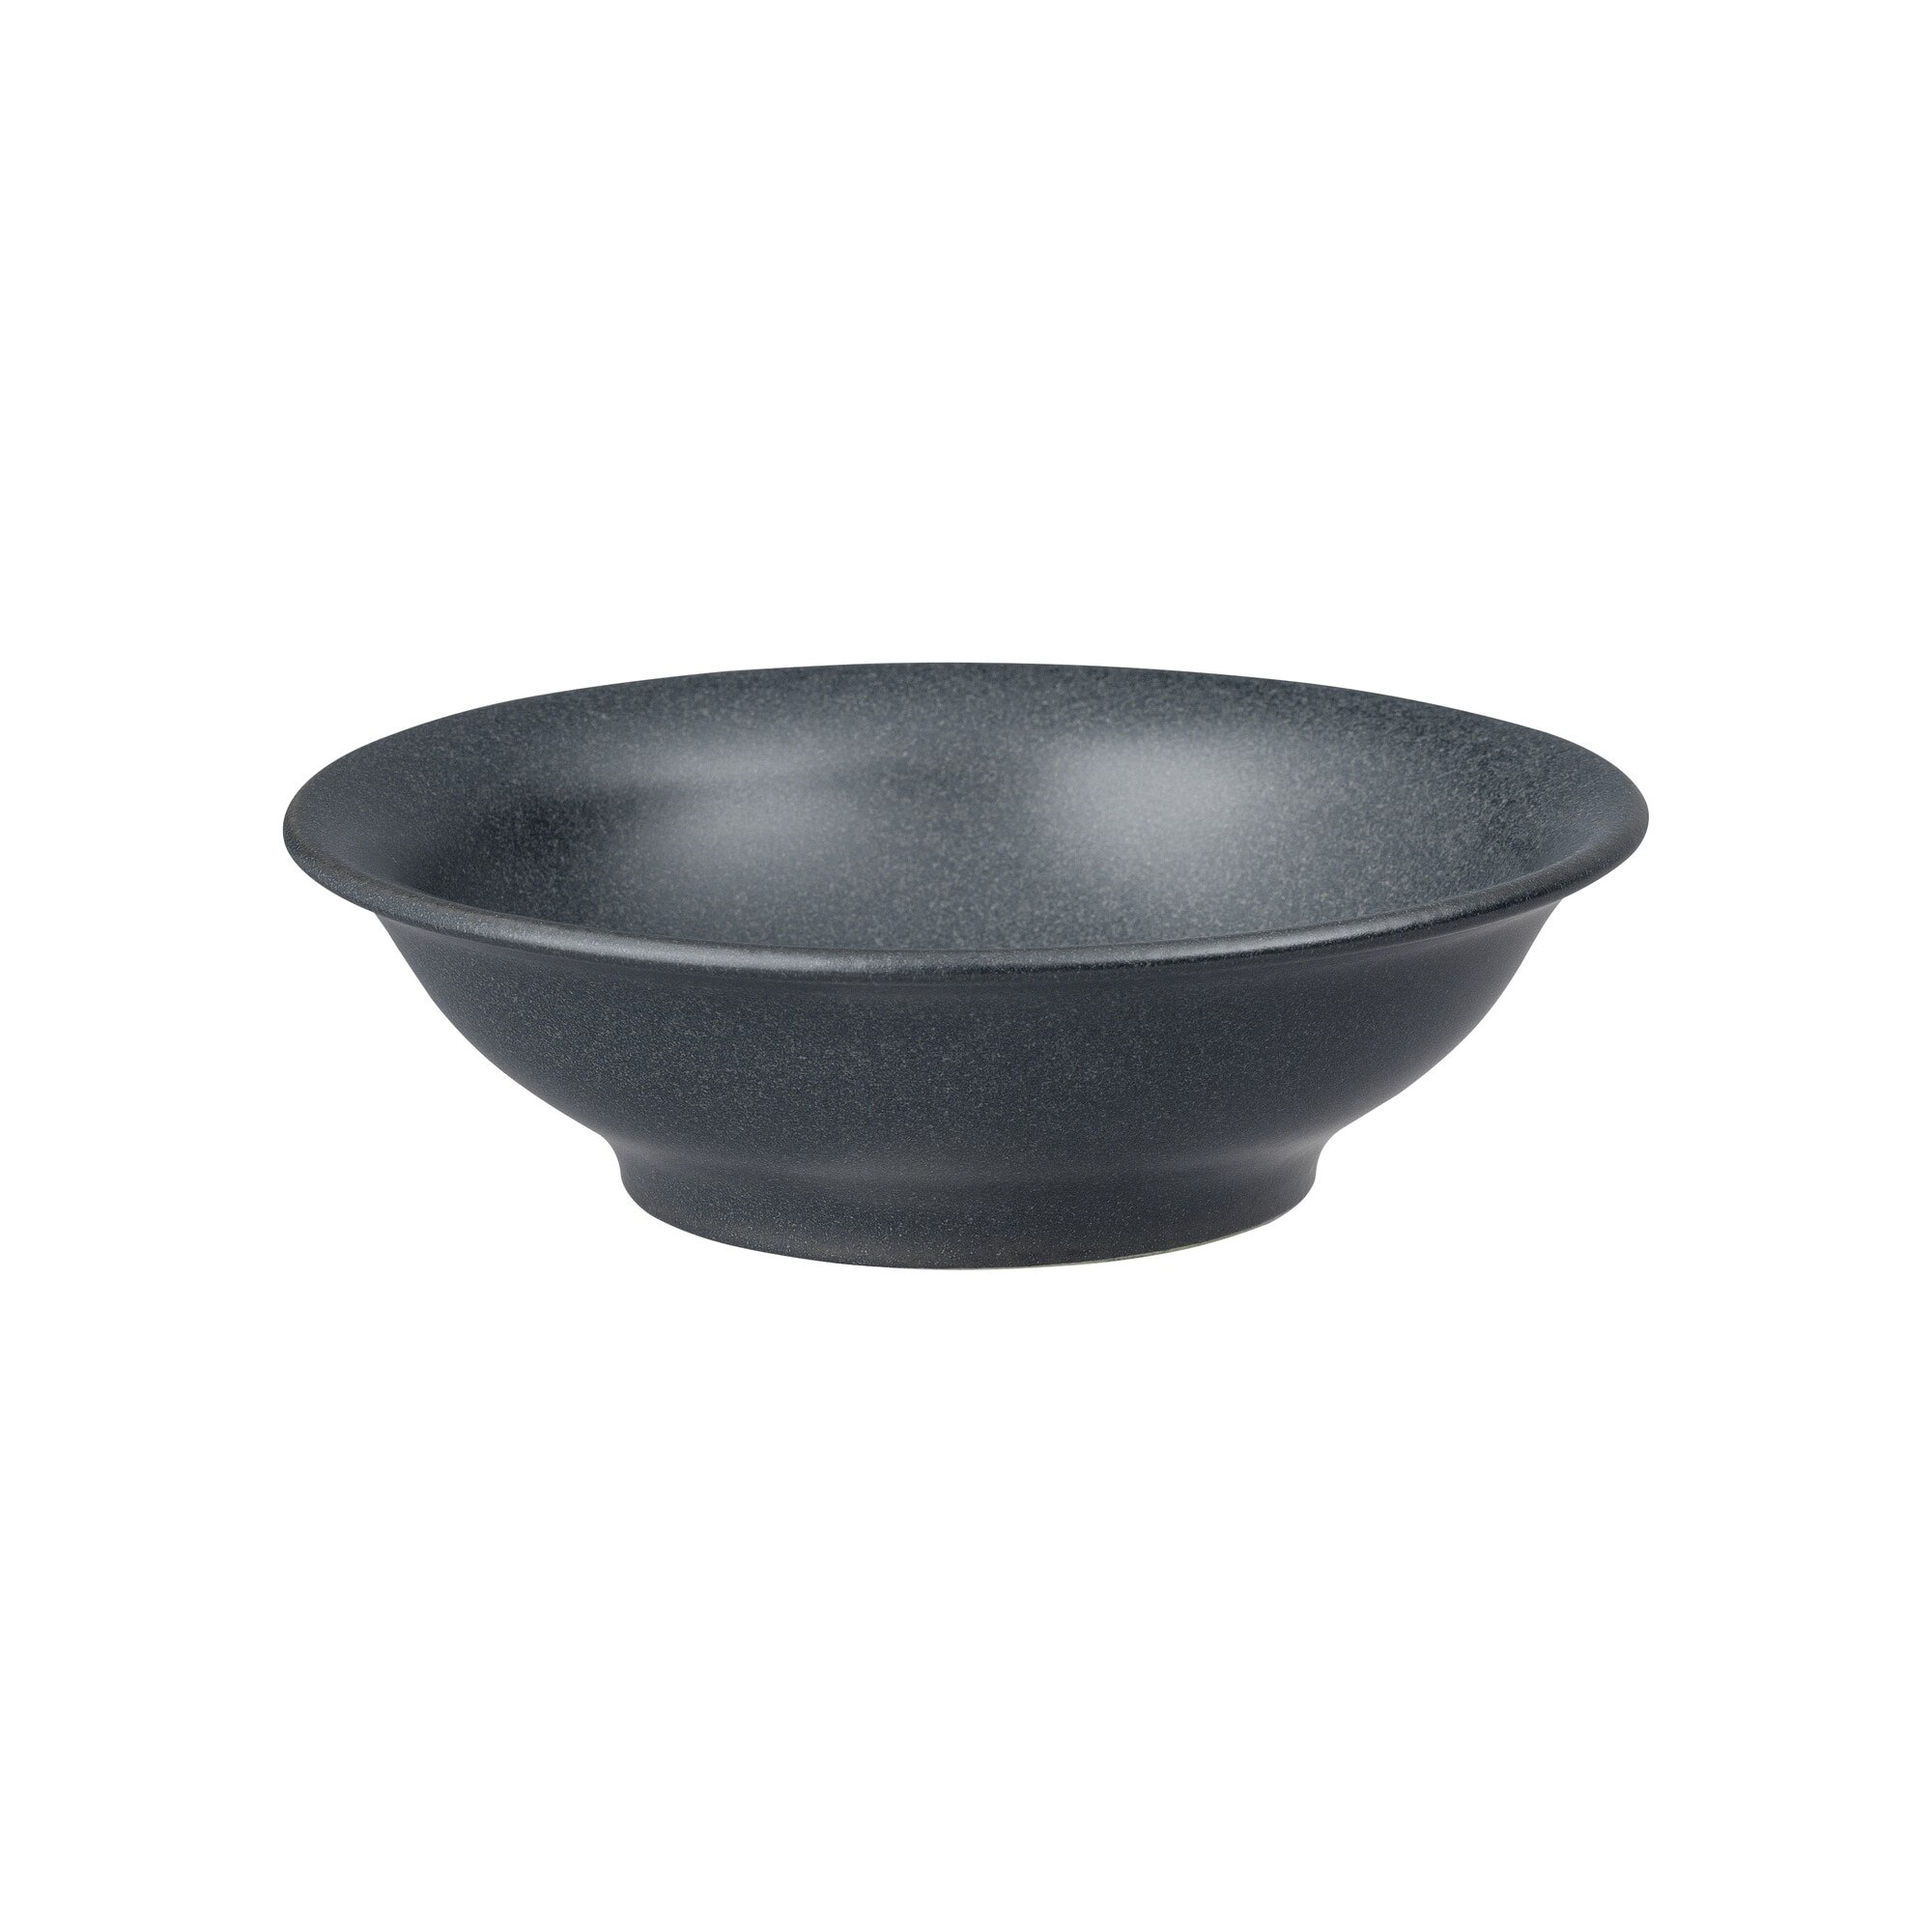 Impression Charcoal Small Shallow Bowl